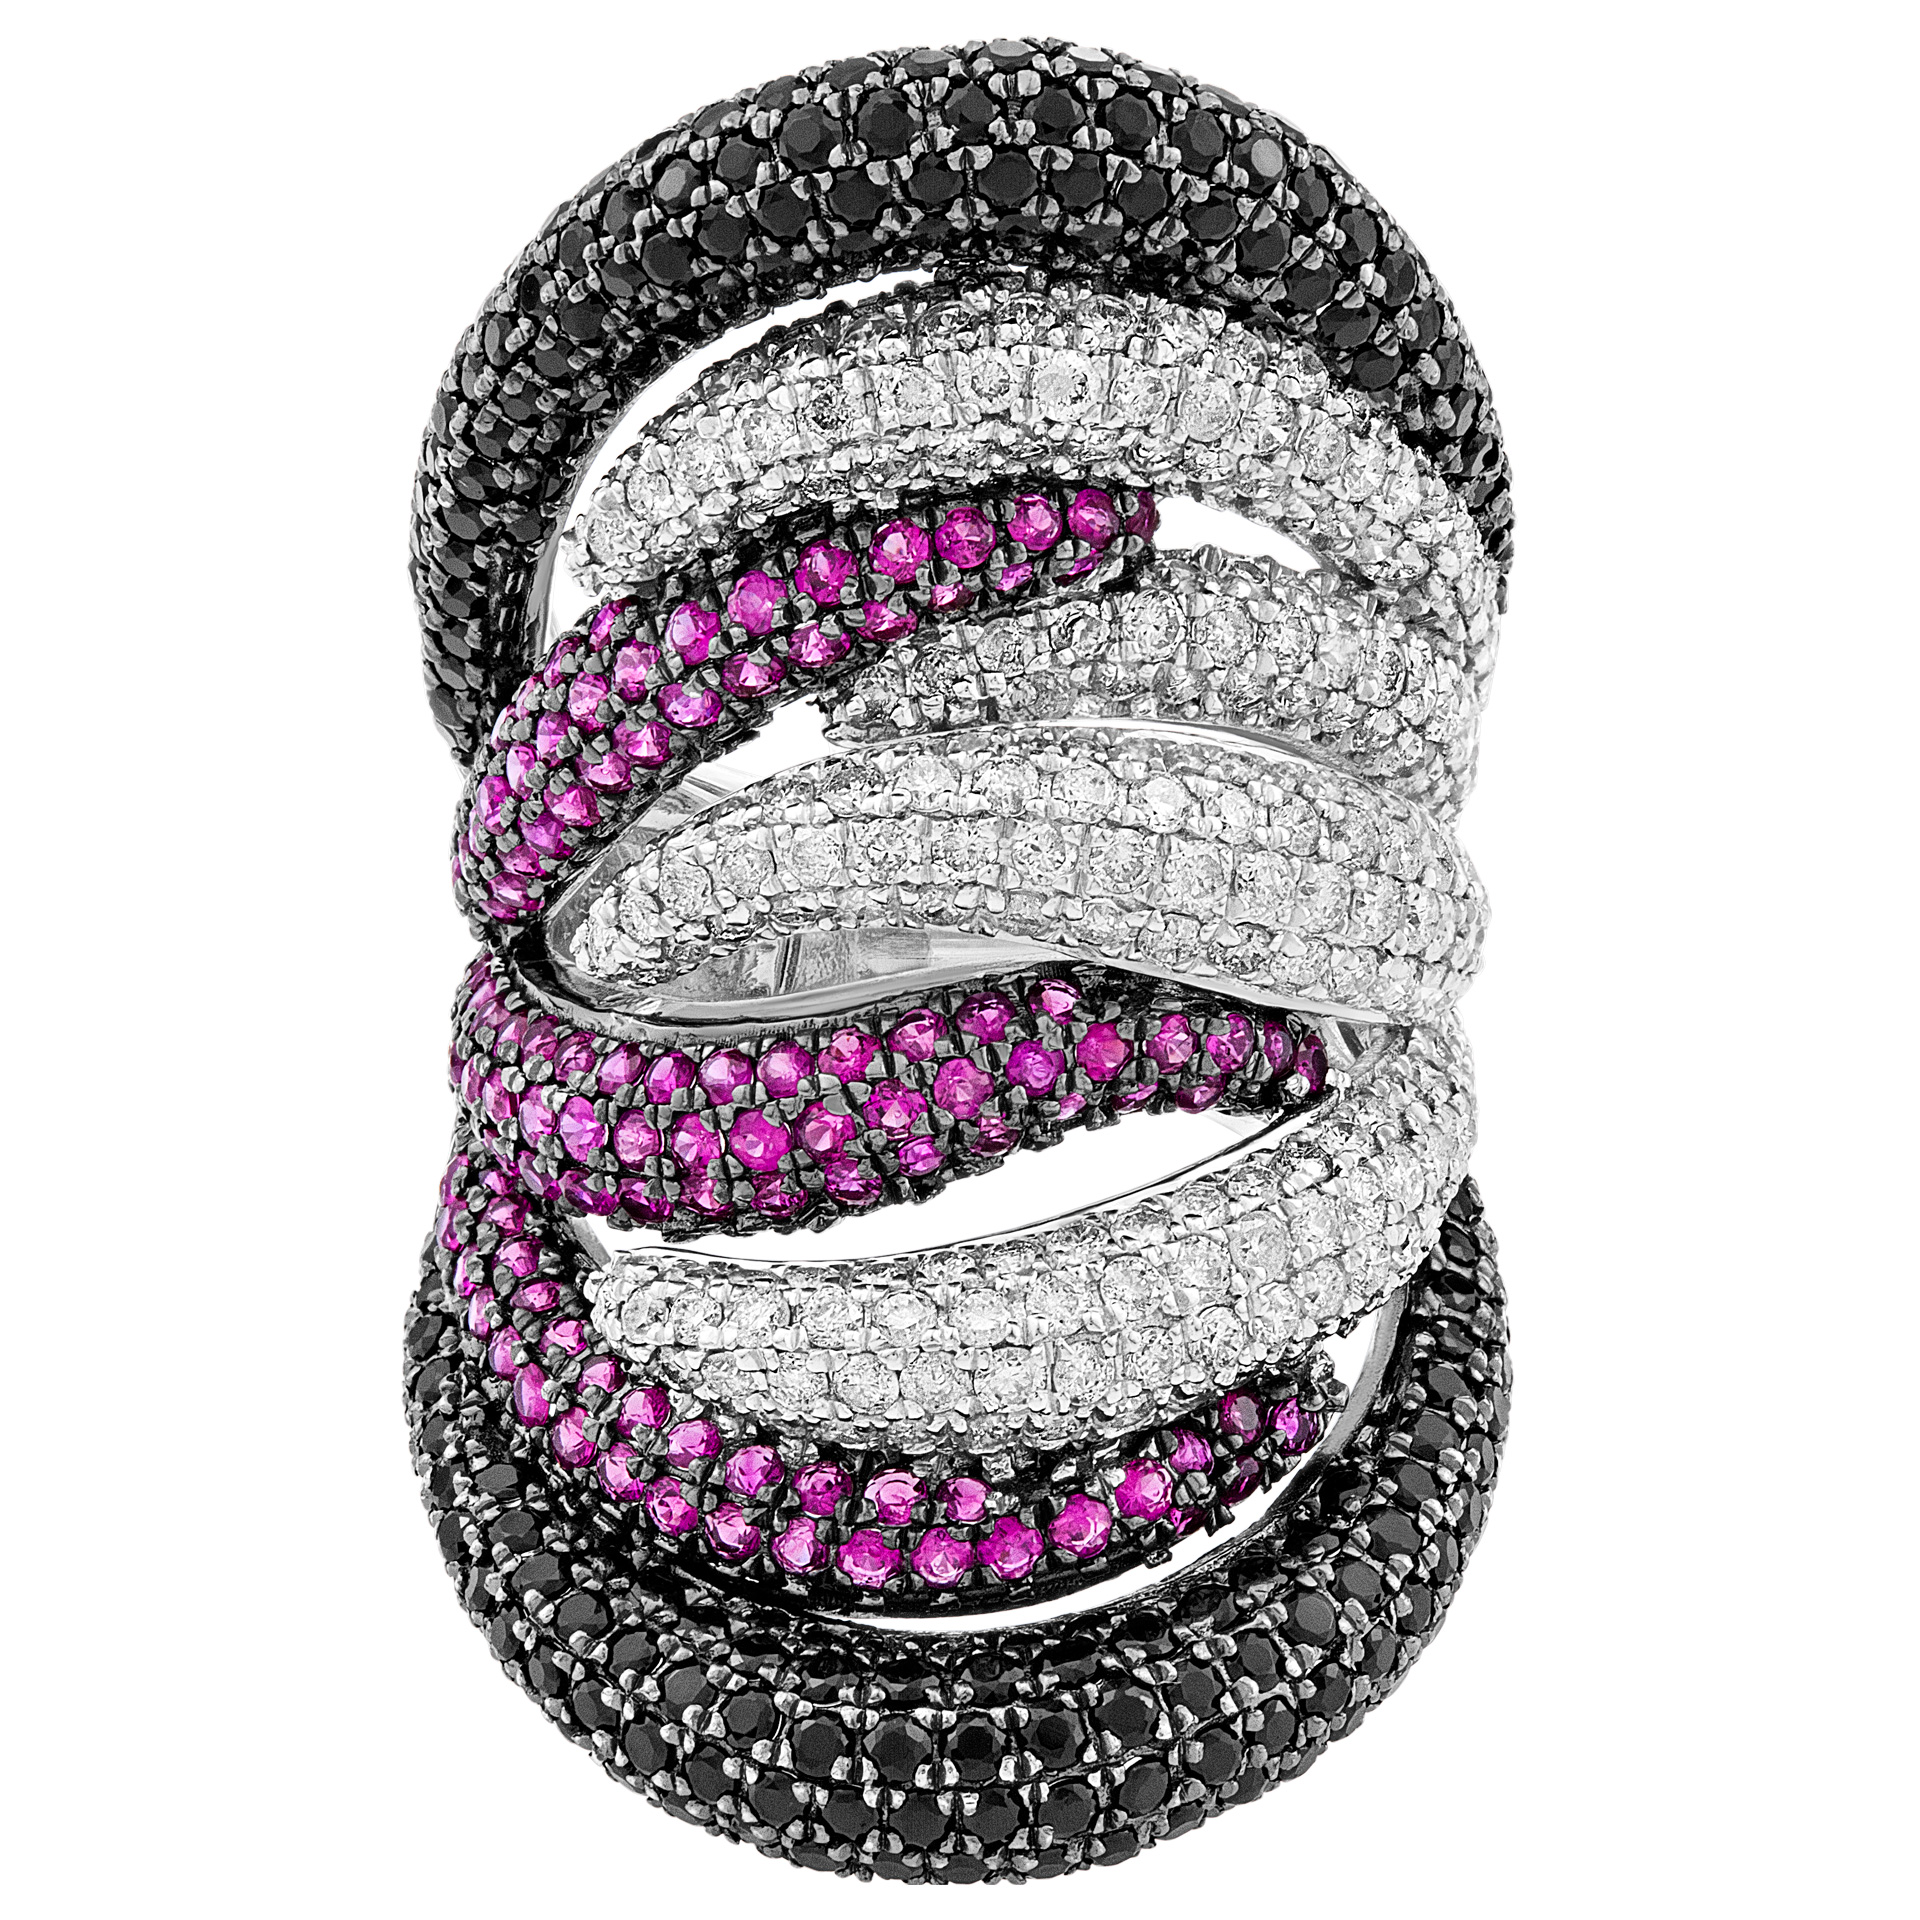 Diamond, ruby and sapphire ring in 18K white gold